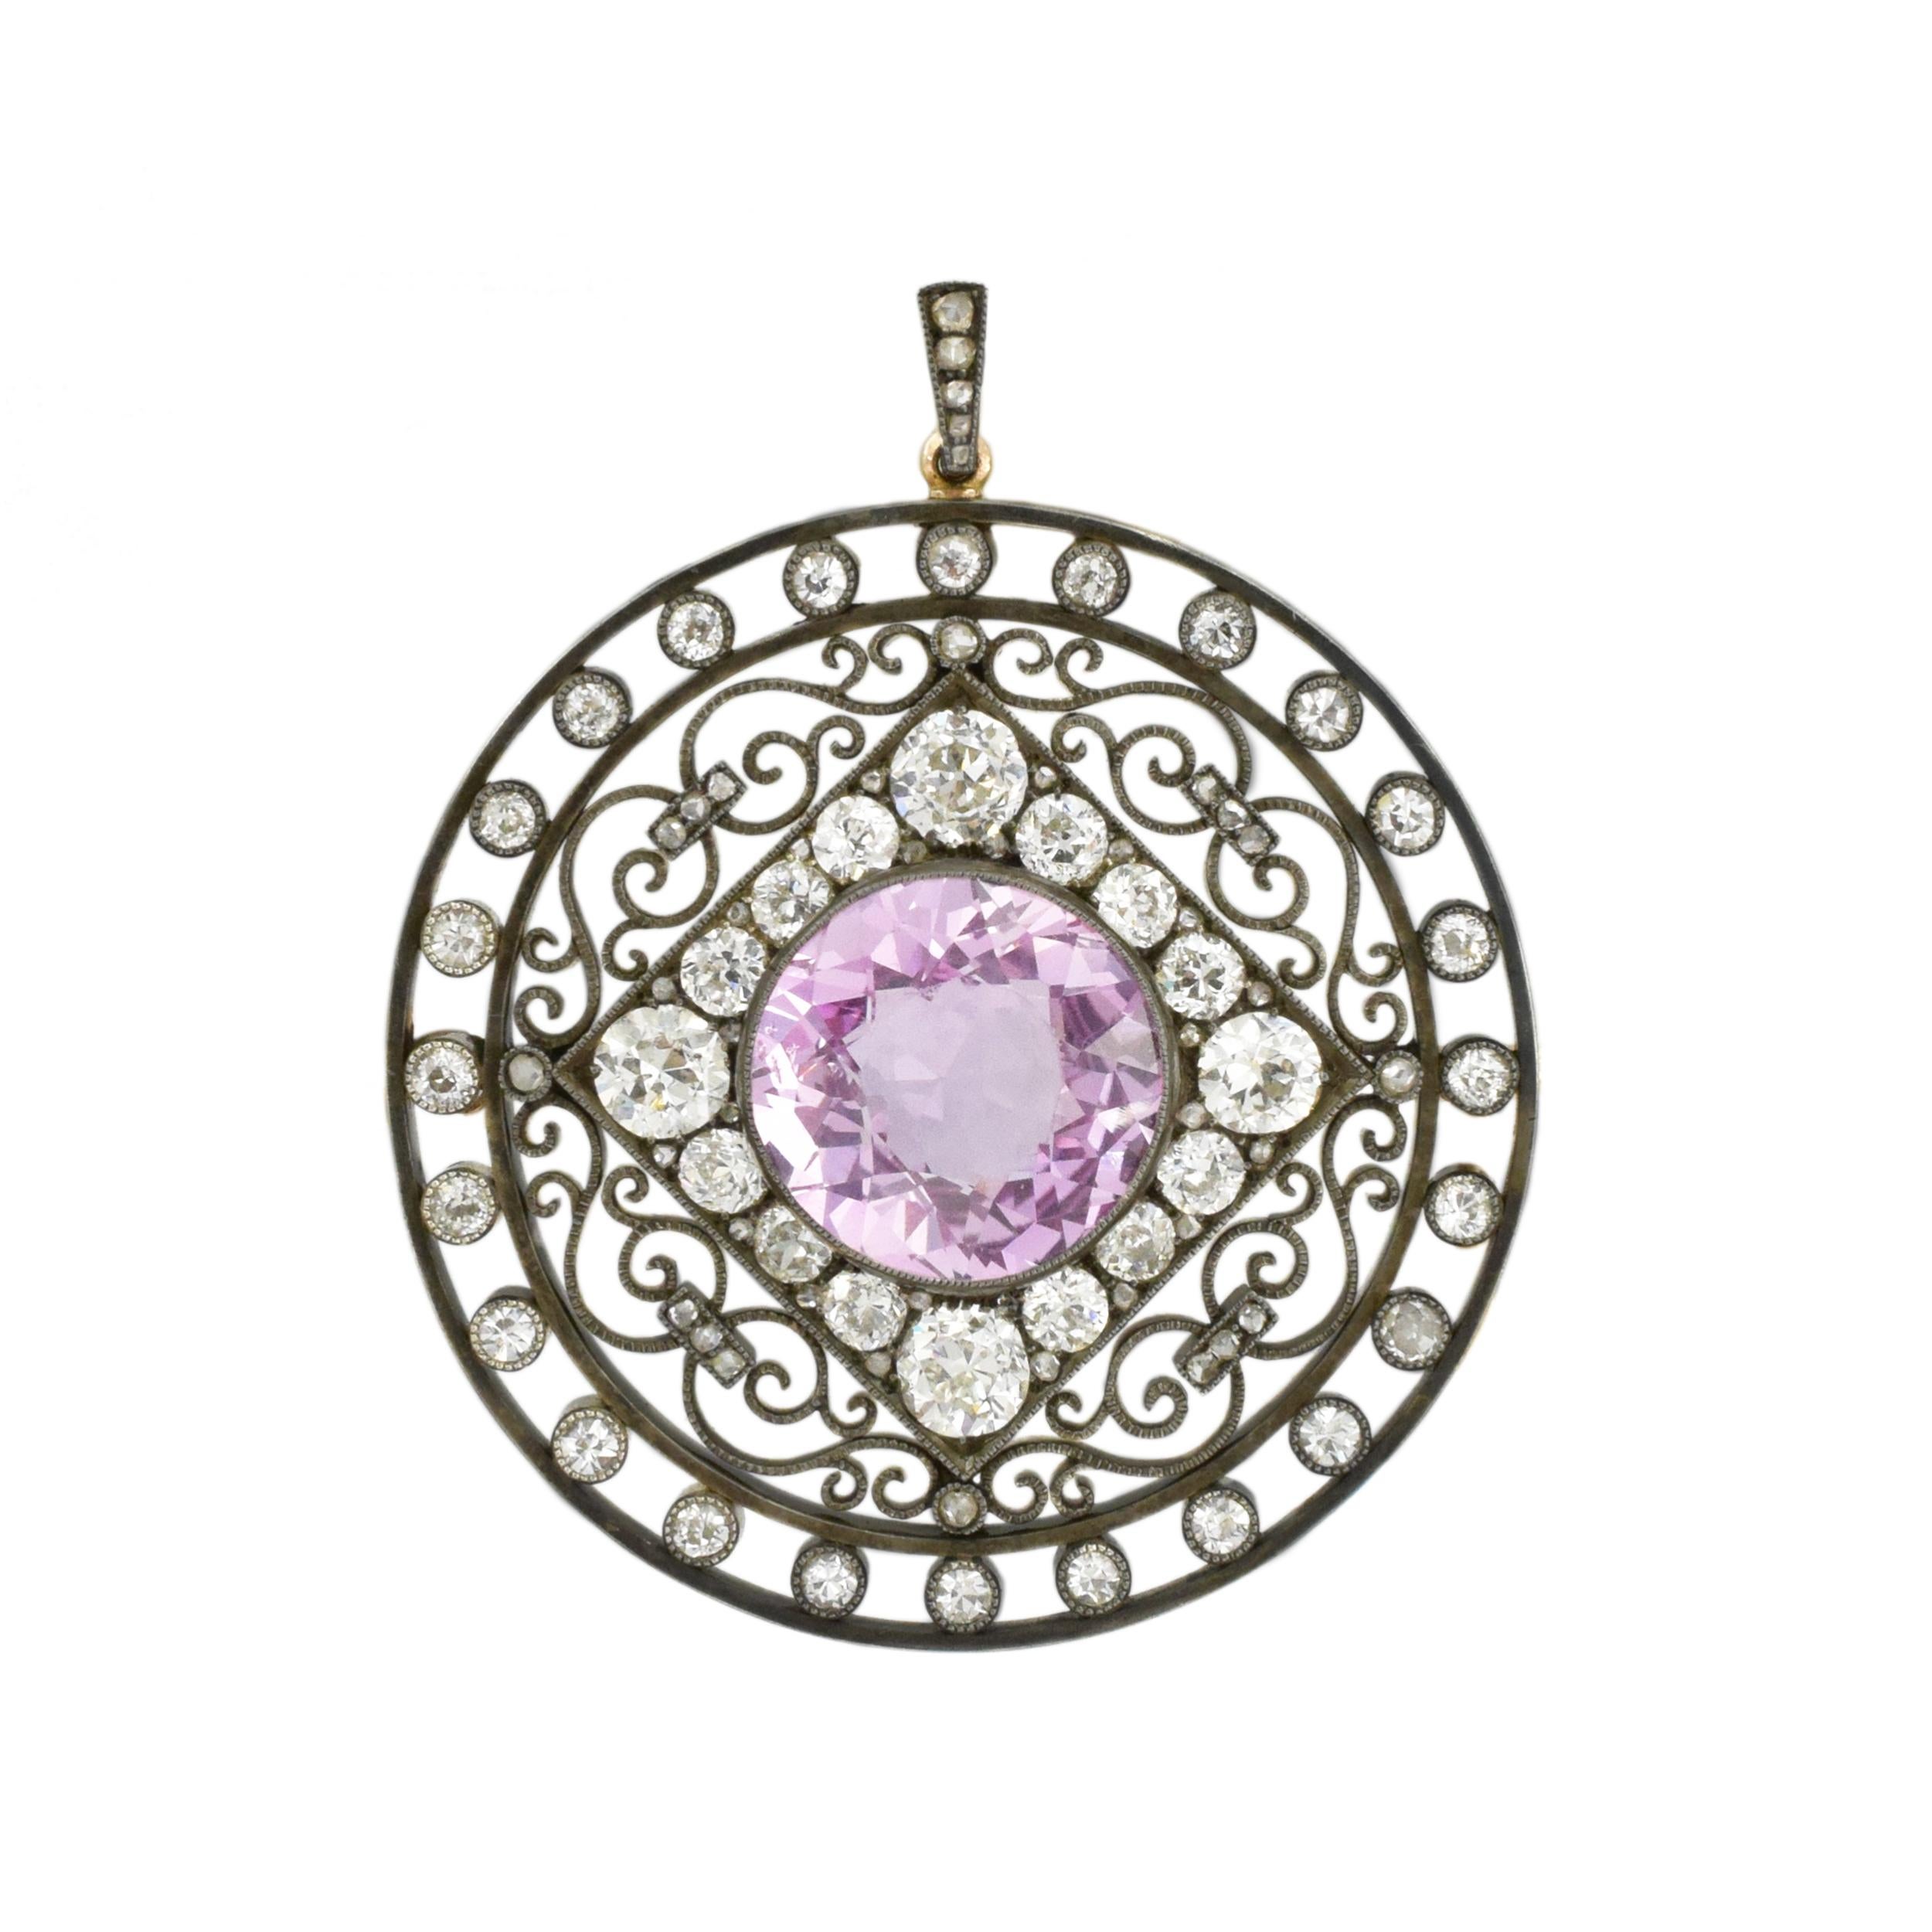 August Holmström for Fabergé; Antique Silver, Gold, Pink Sapphire and Diamond Brooch. This circular wire pendant features approximately 7.30carats round pink sapphire
surrounded by a square frame encrusted with 16 cushion-shaped and old European-cut